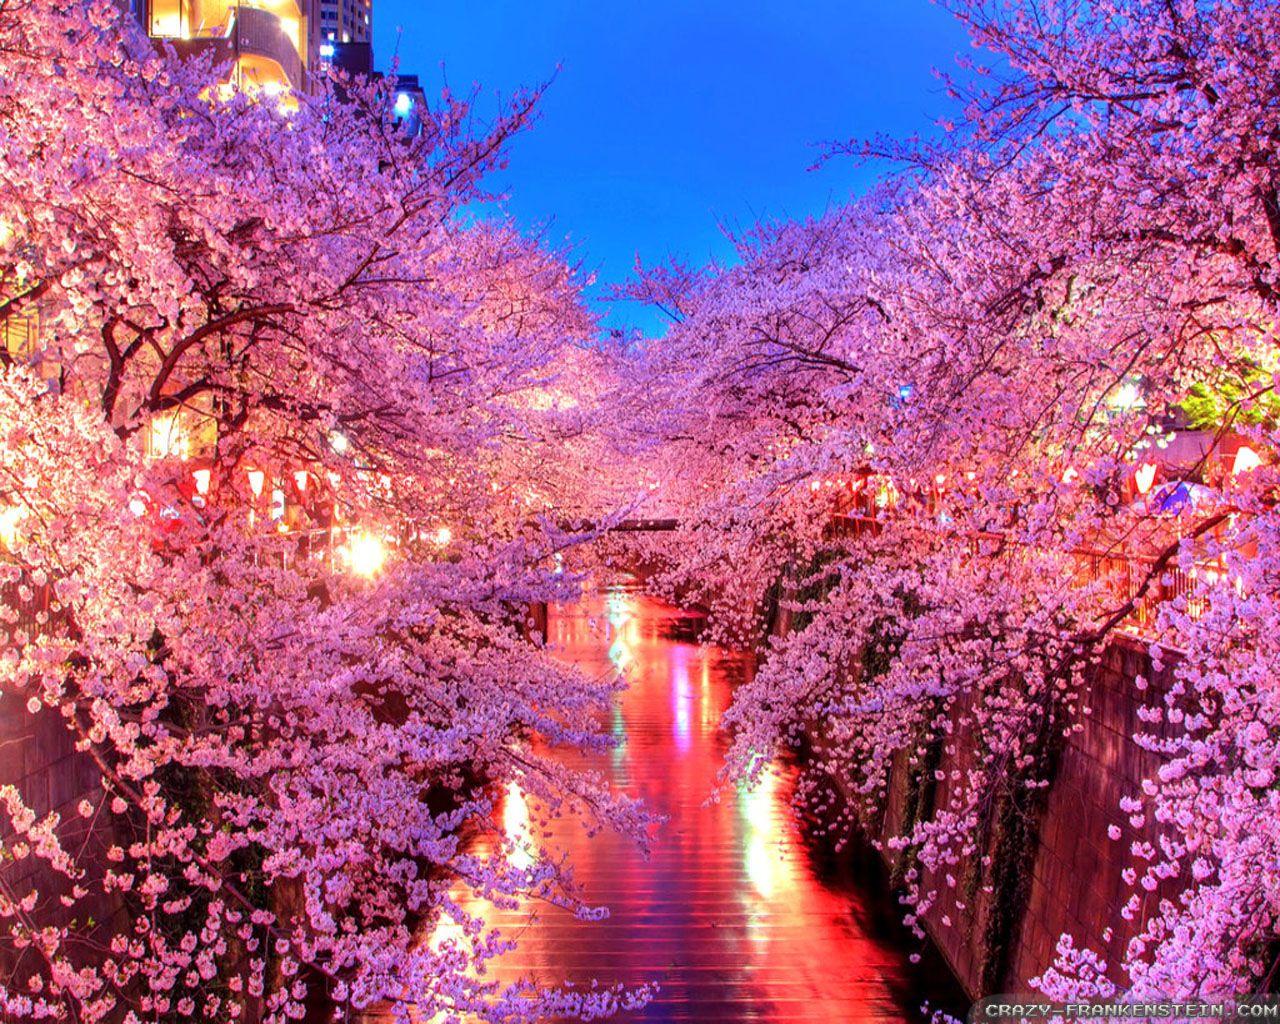 Cherry Blossom Tree at Night Wallpapers - Top Free Cherry Blossom Tree ...